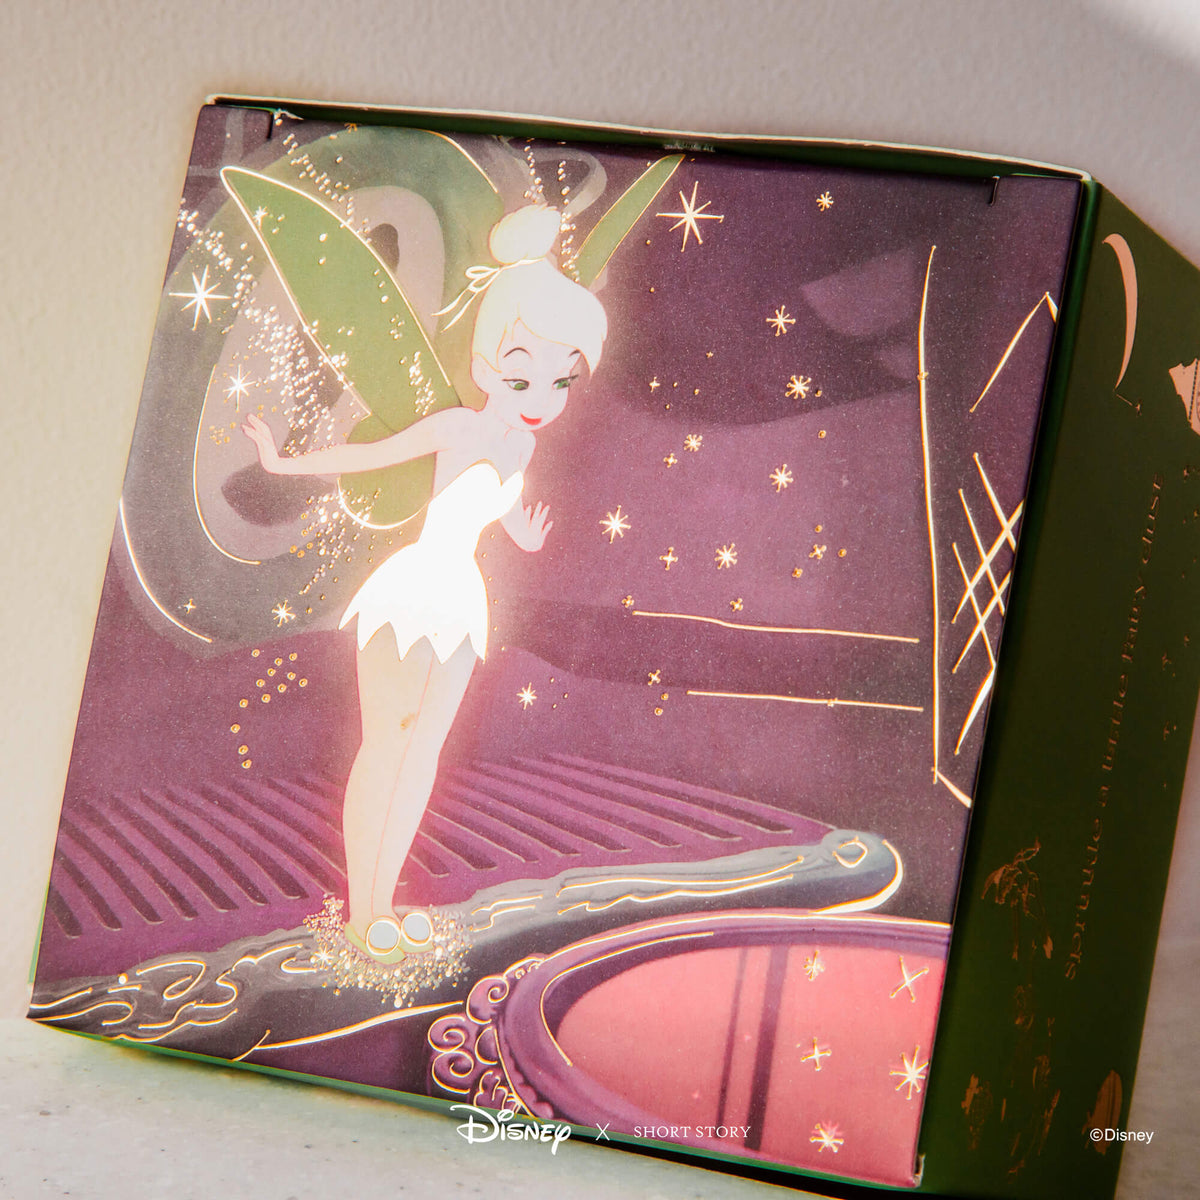 Short Story | Disney Candle Tinker Bell 280g